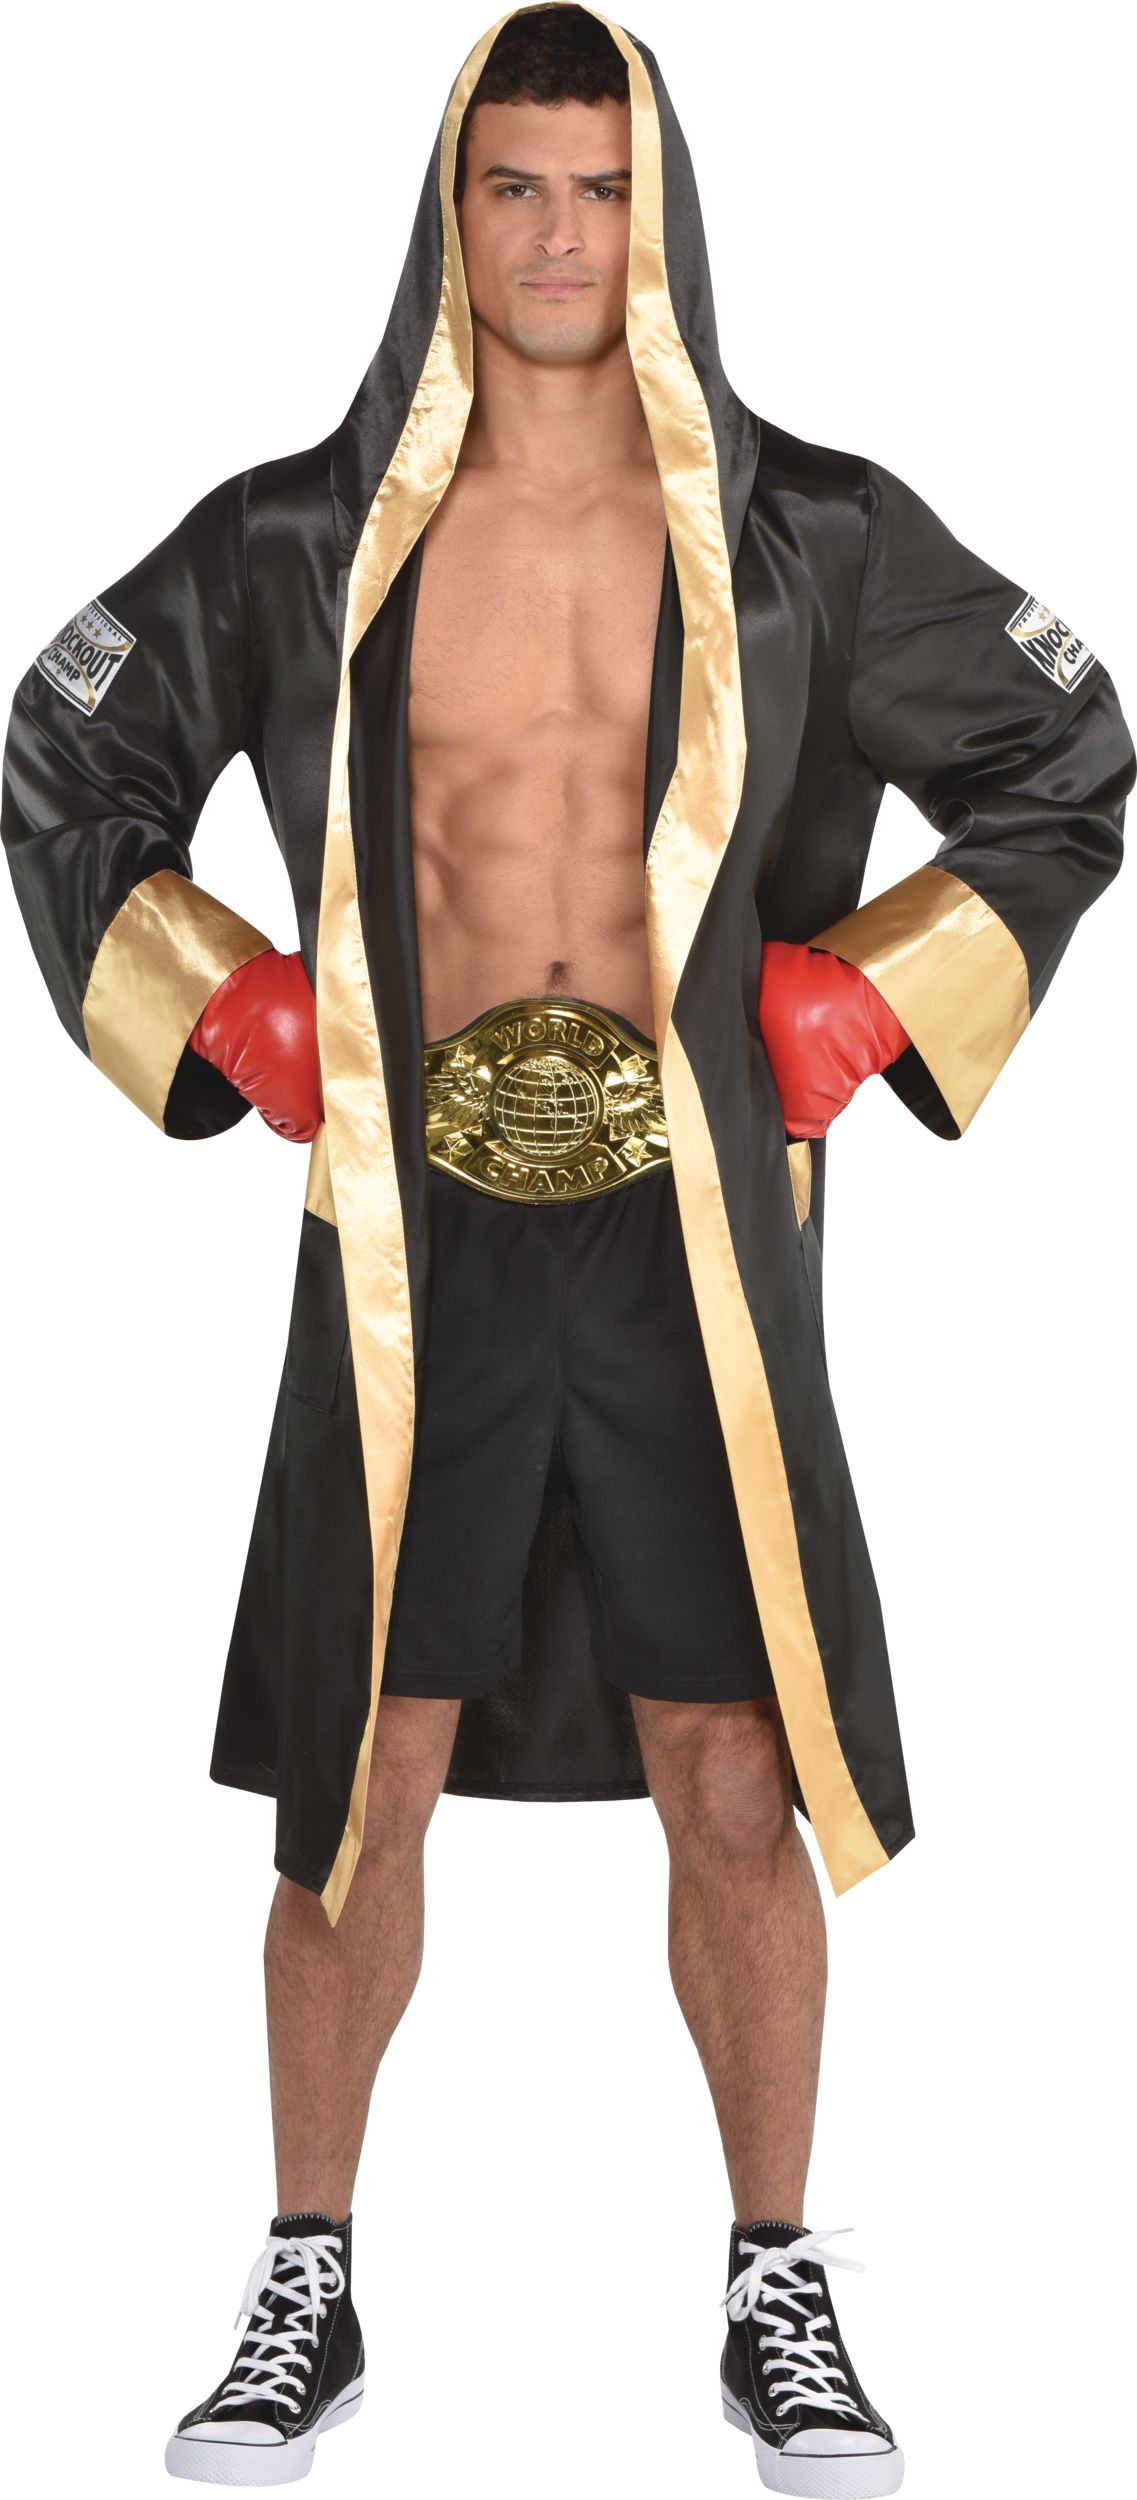 Adult Boxer Robe, Black/Gold, One Size, Wearable Costume Accessory for  Halloween